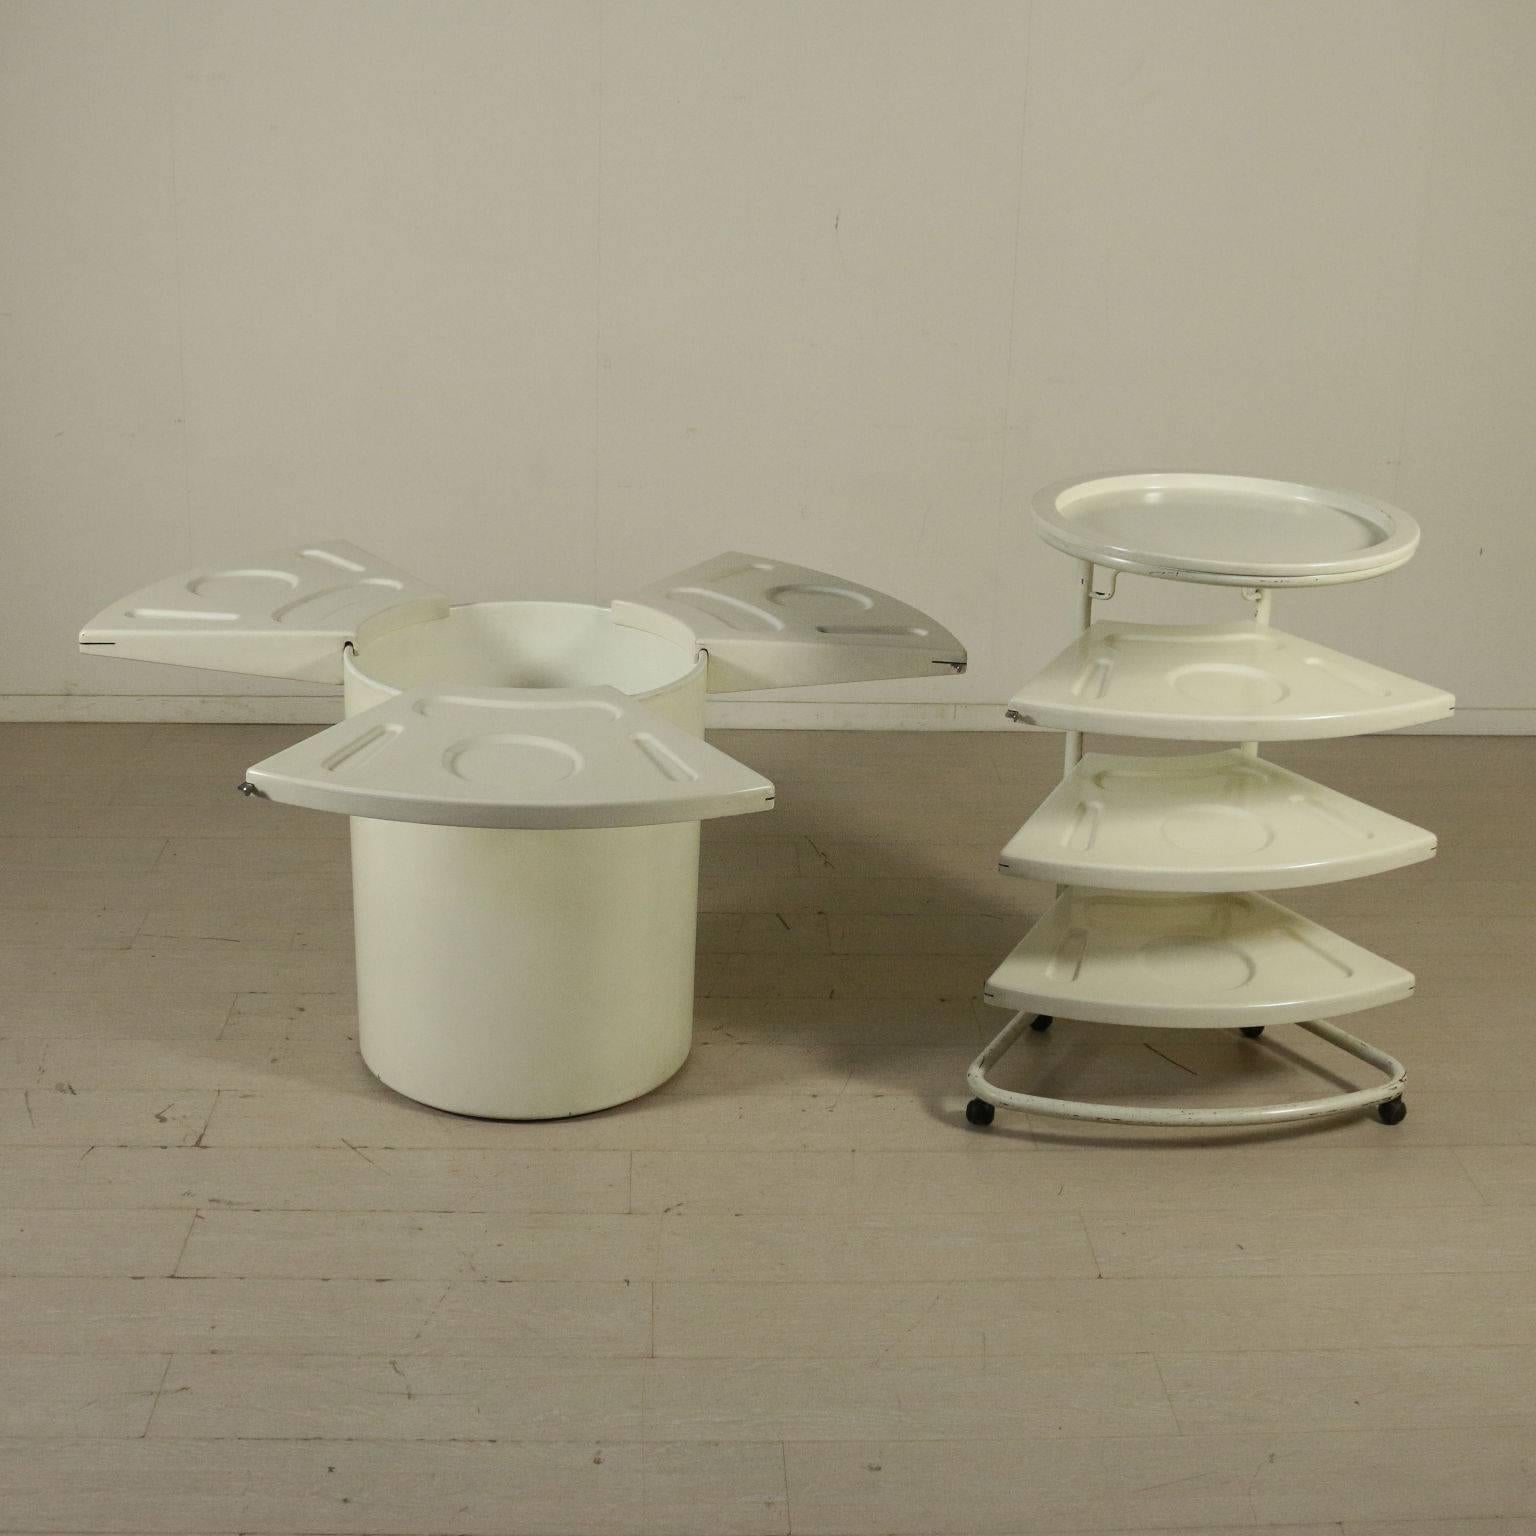 A round table designed by Fabio Lenci (1935) for Bernini. The top consists of six wedges with the prints of the table elements. The top can be disassembled and the wedges can be placed in the cart. Manufactured in Italy, 1970s.